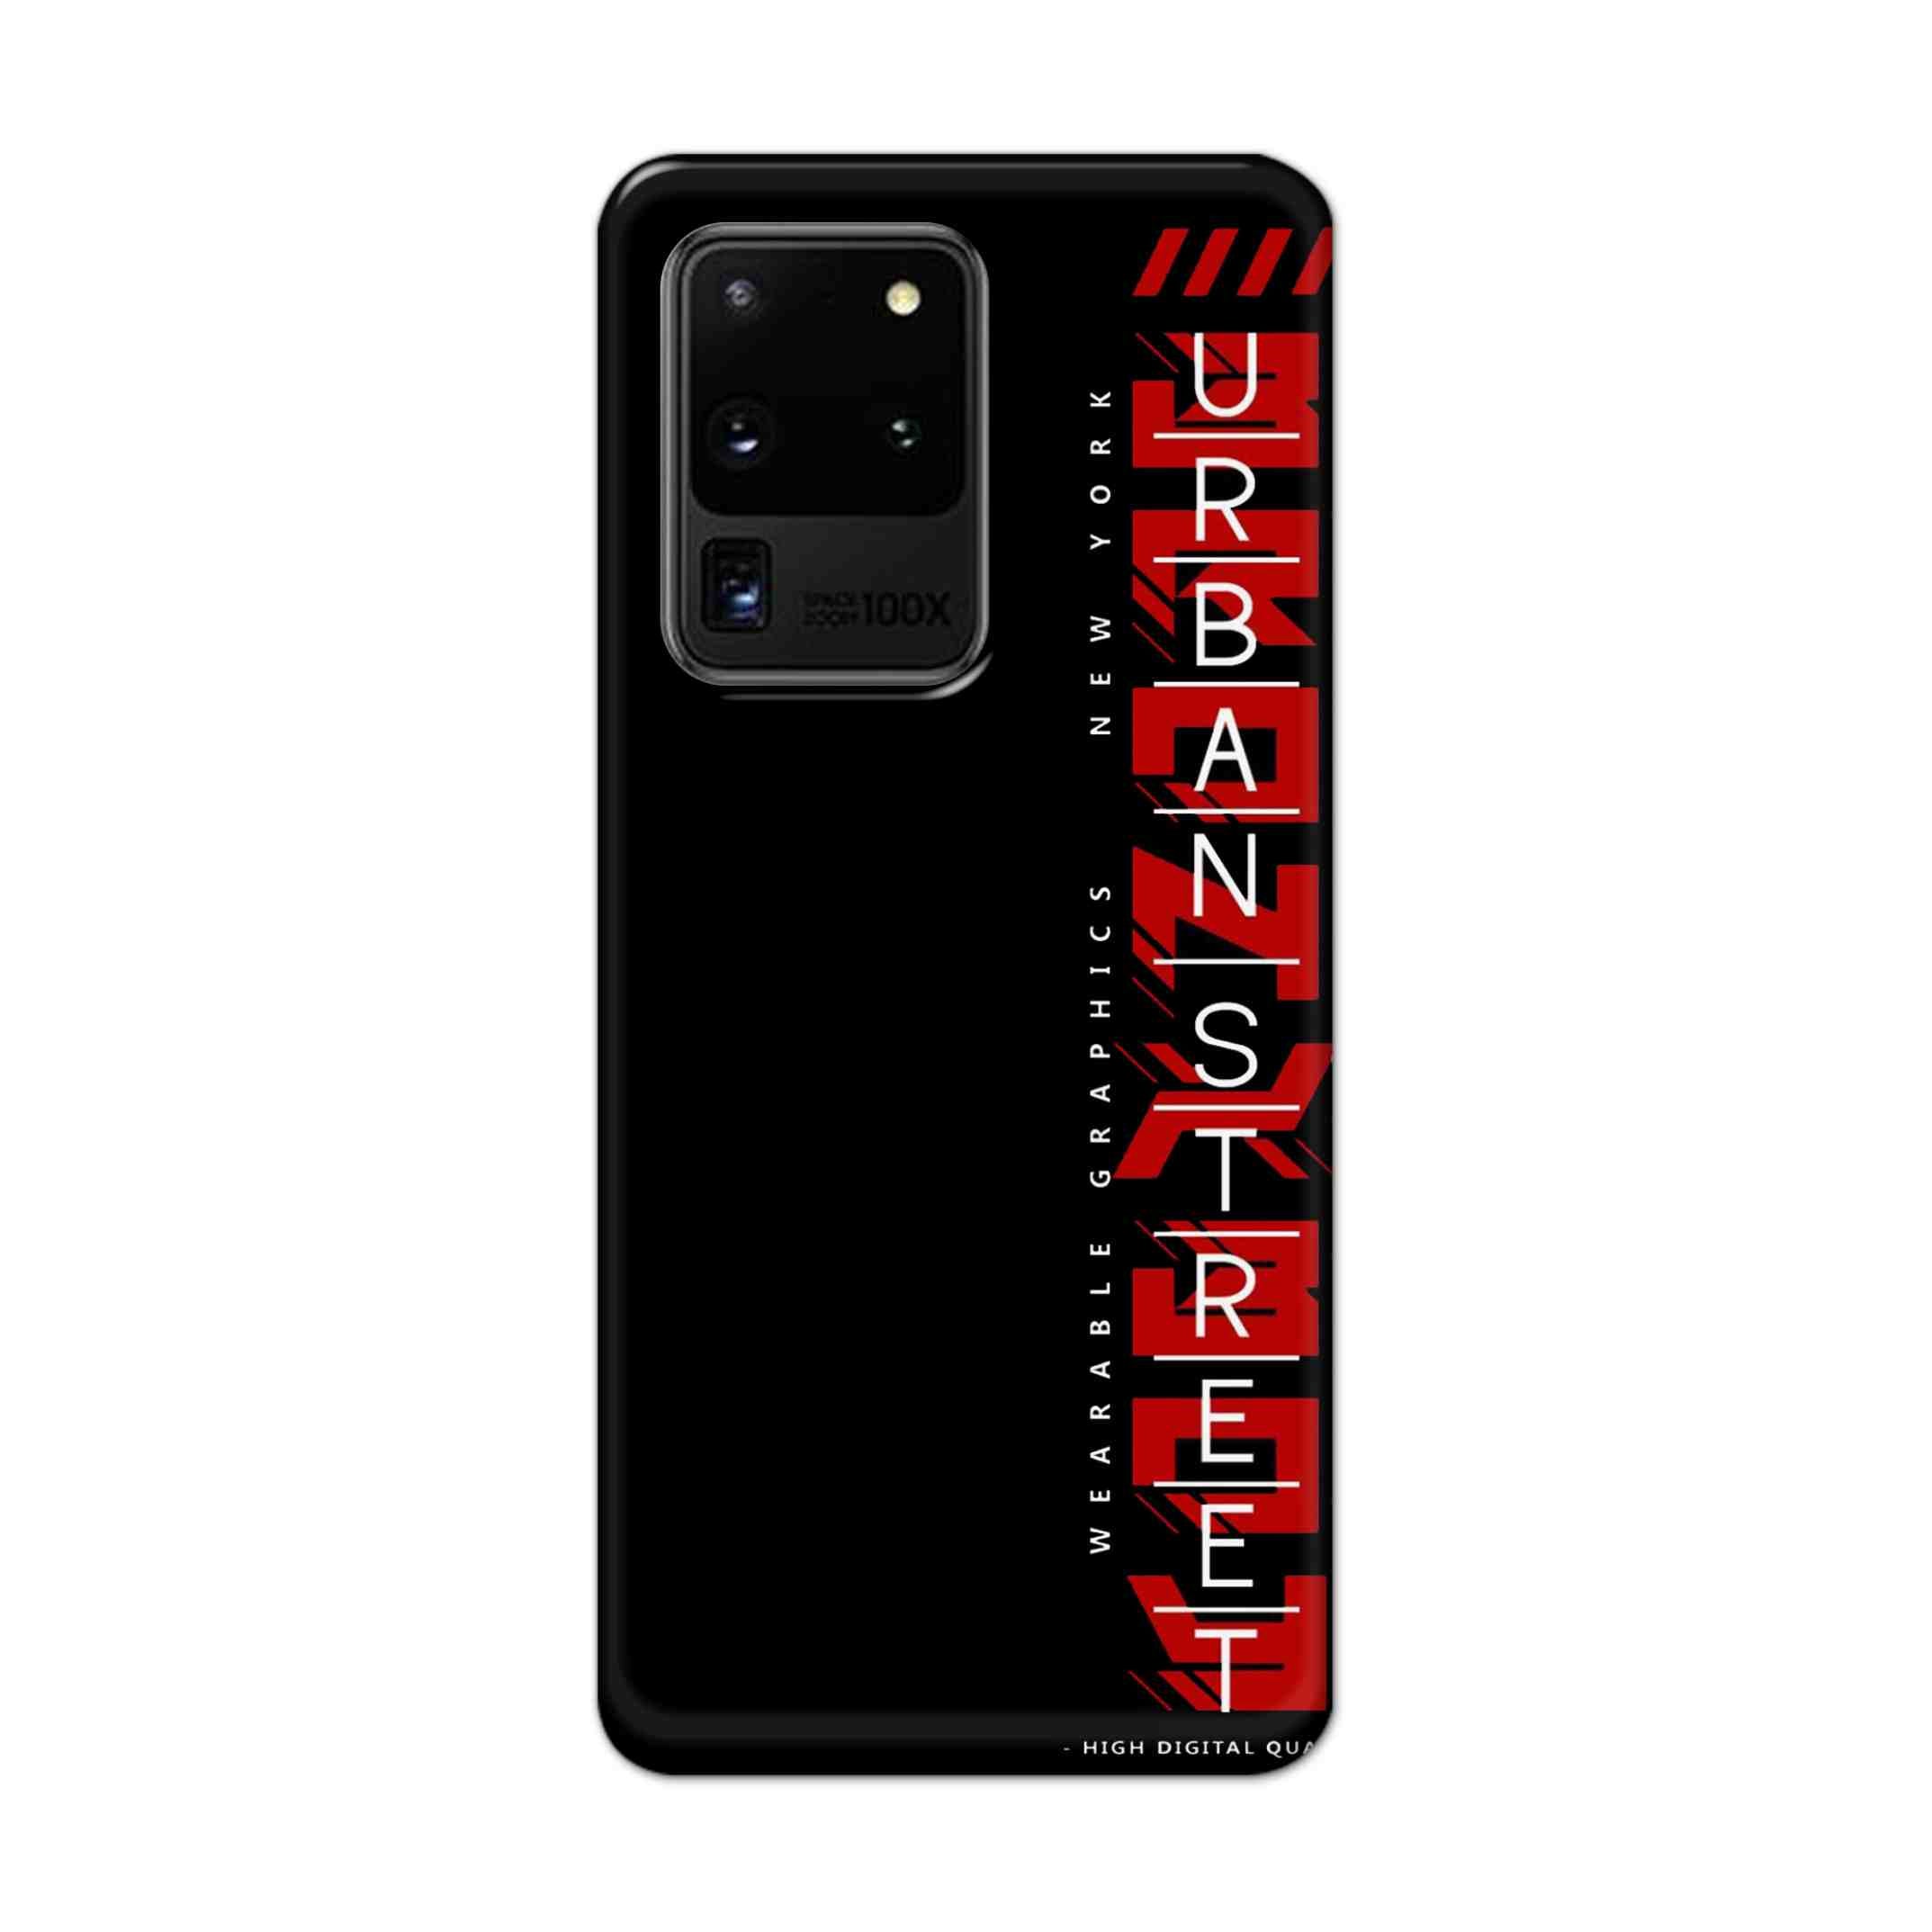 Buy Urban Street Hard Back Mobile Phone Case Cover For Samsung Galaxy S20 Ultra Online